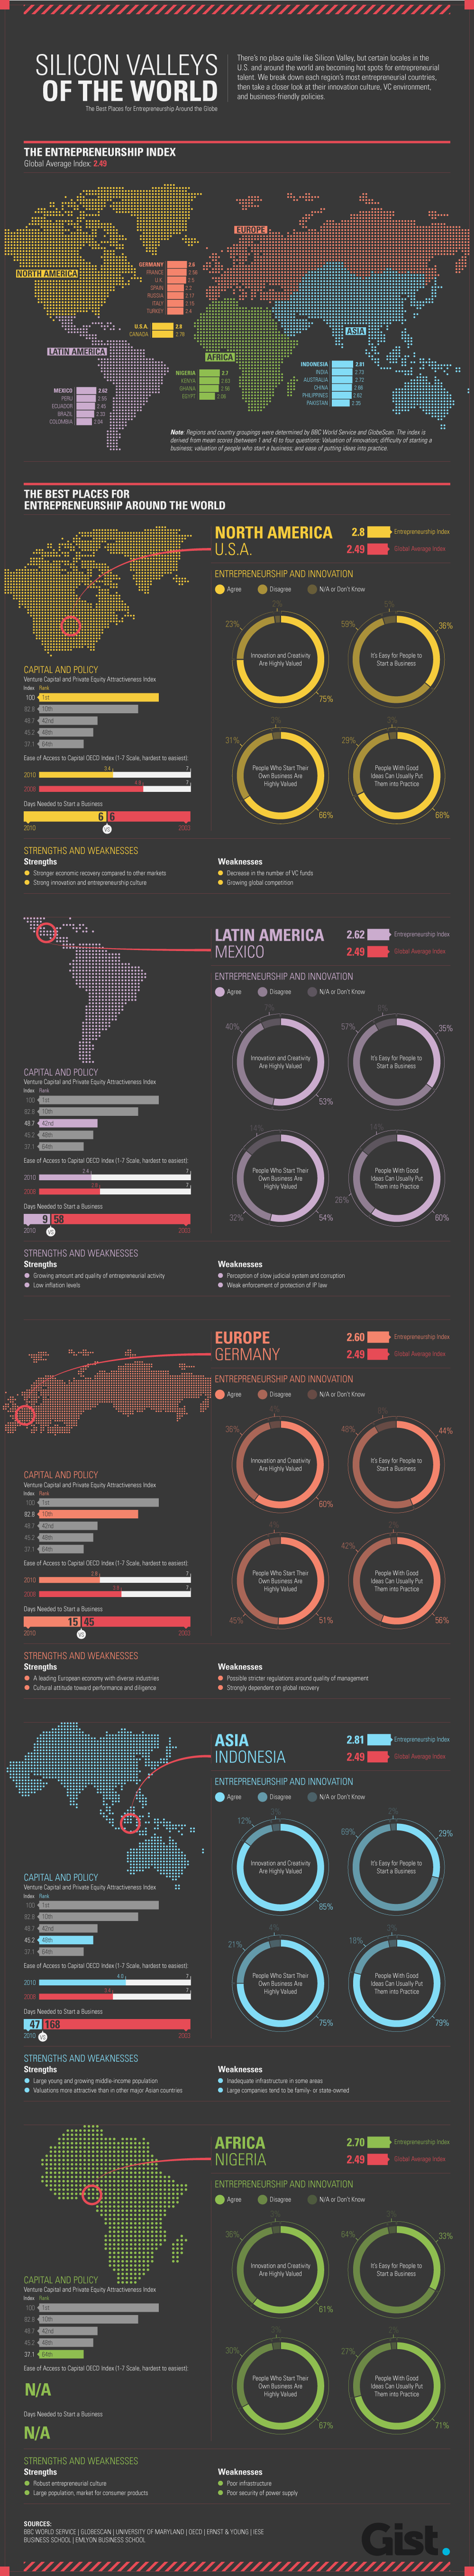 Silicon Valleys of the World Infographic